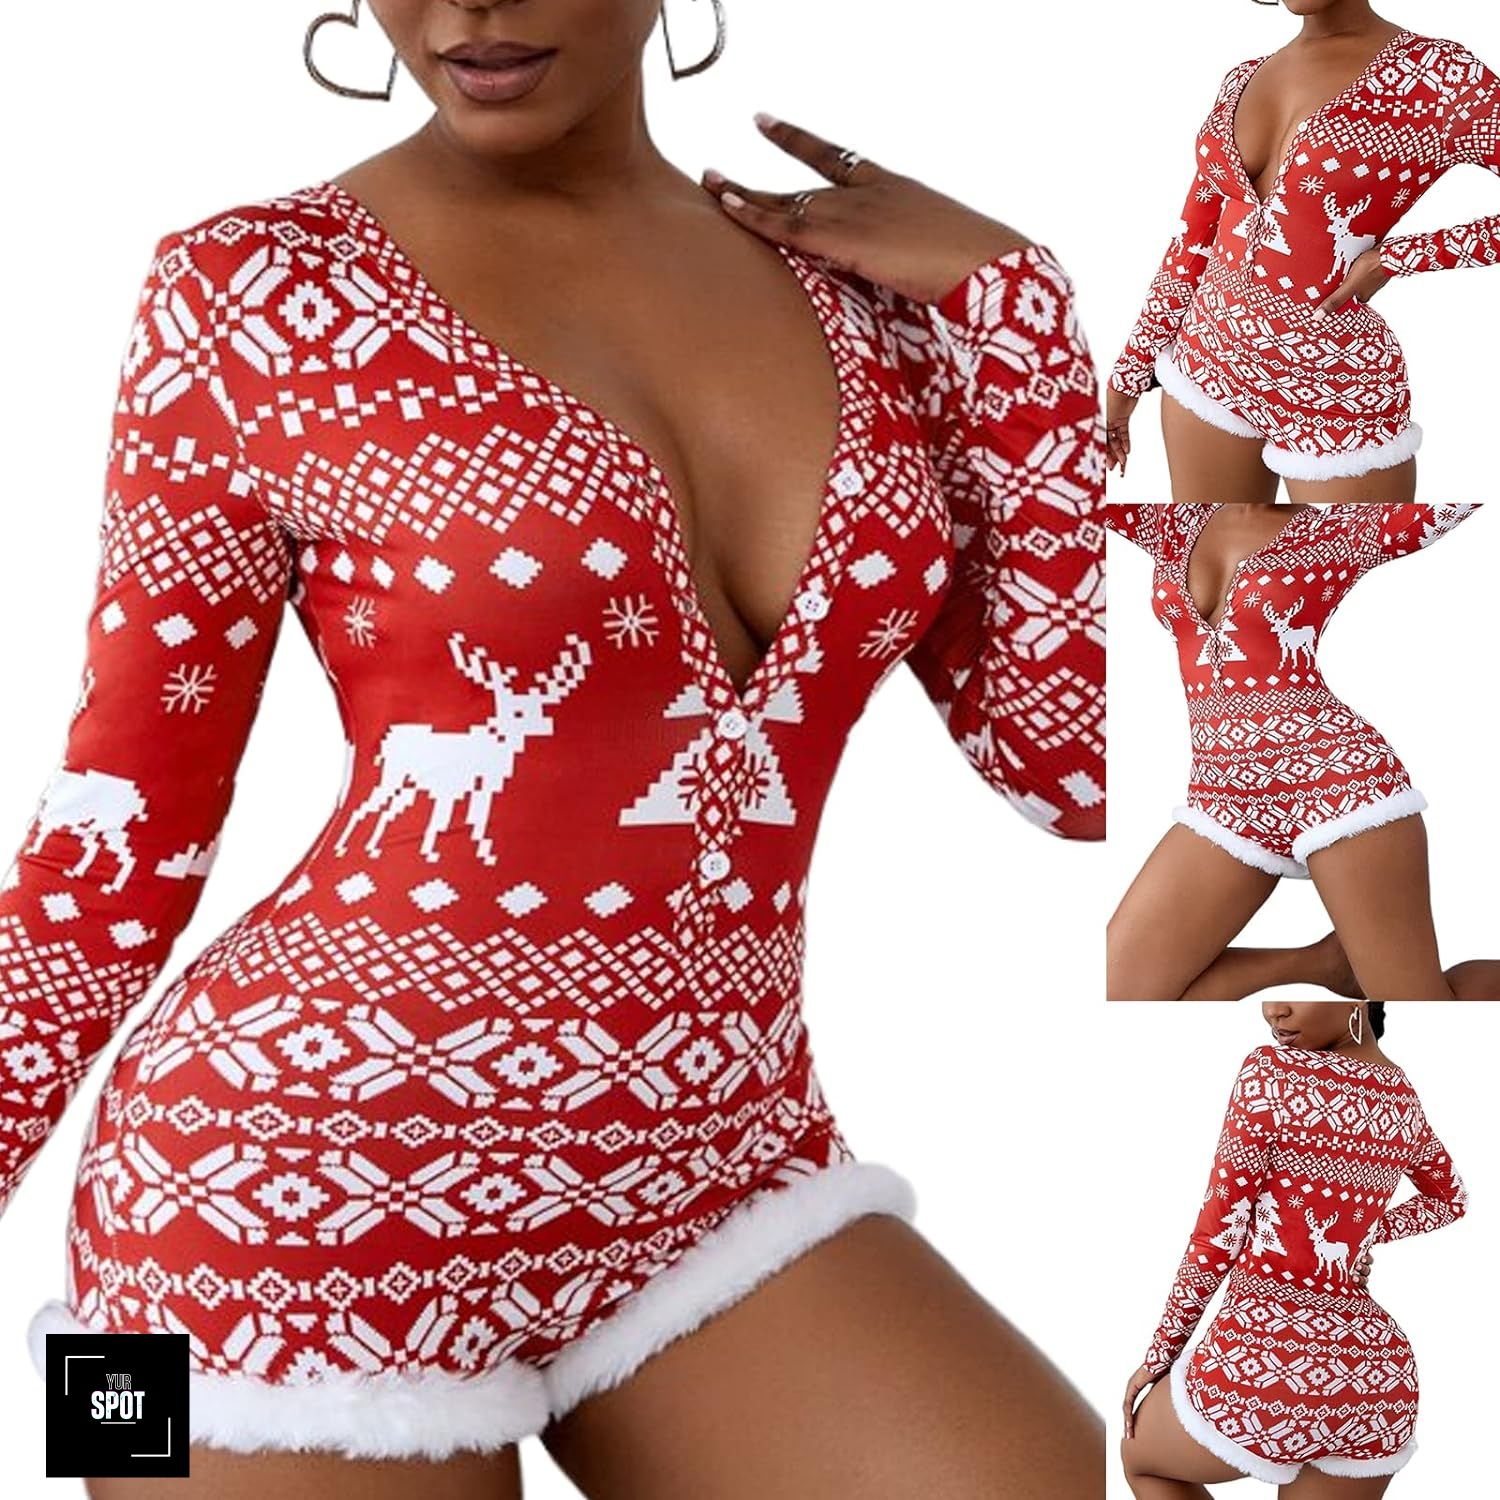 "Cozy and Chic: Festive Women's Christmas Jumpsuit Onesie with Long Sleeves"